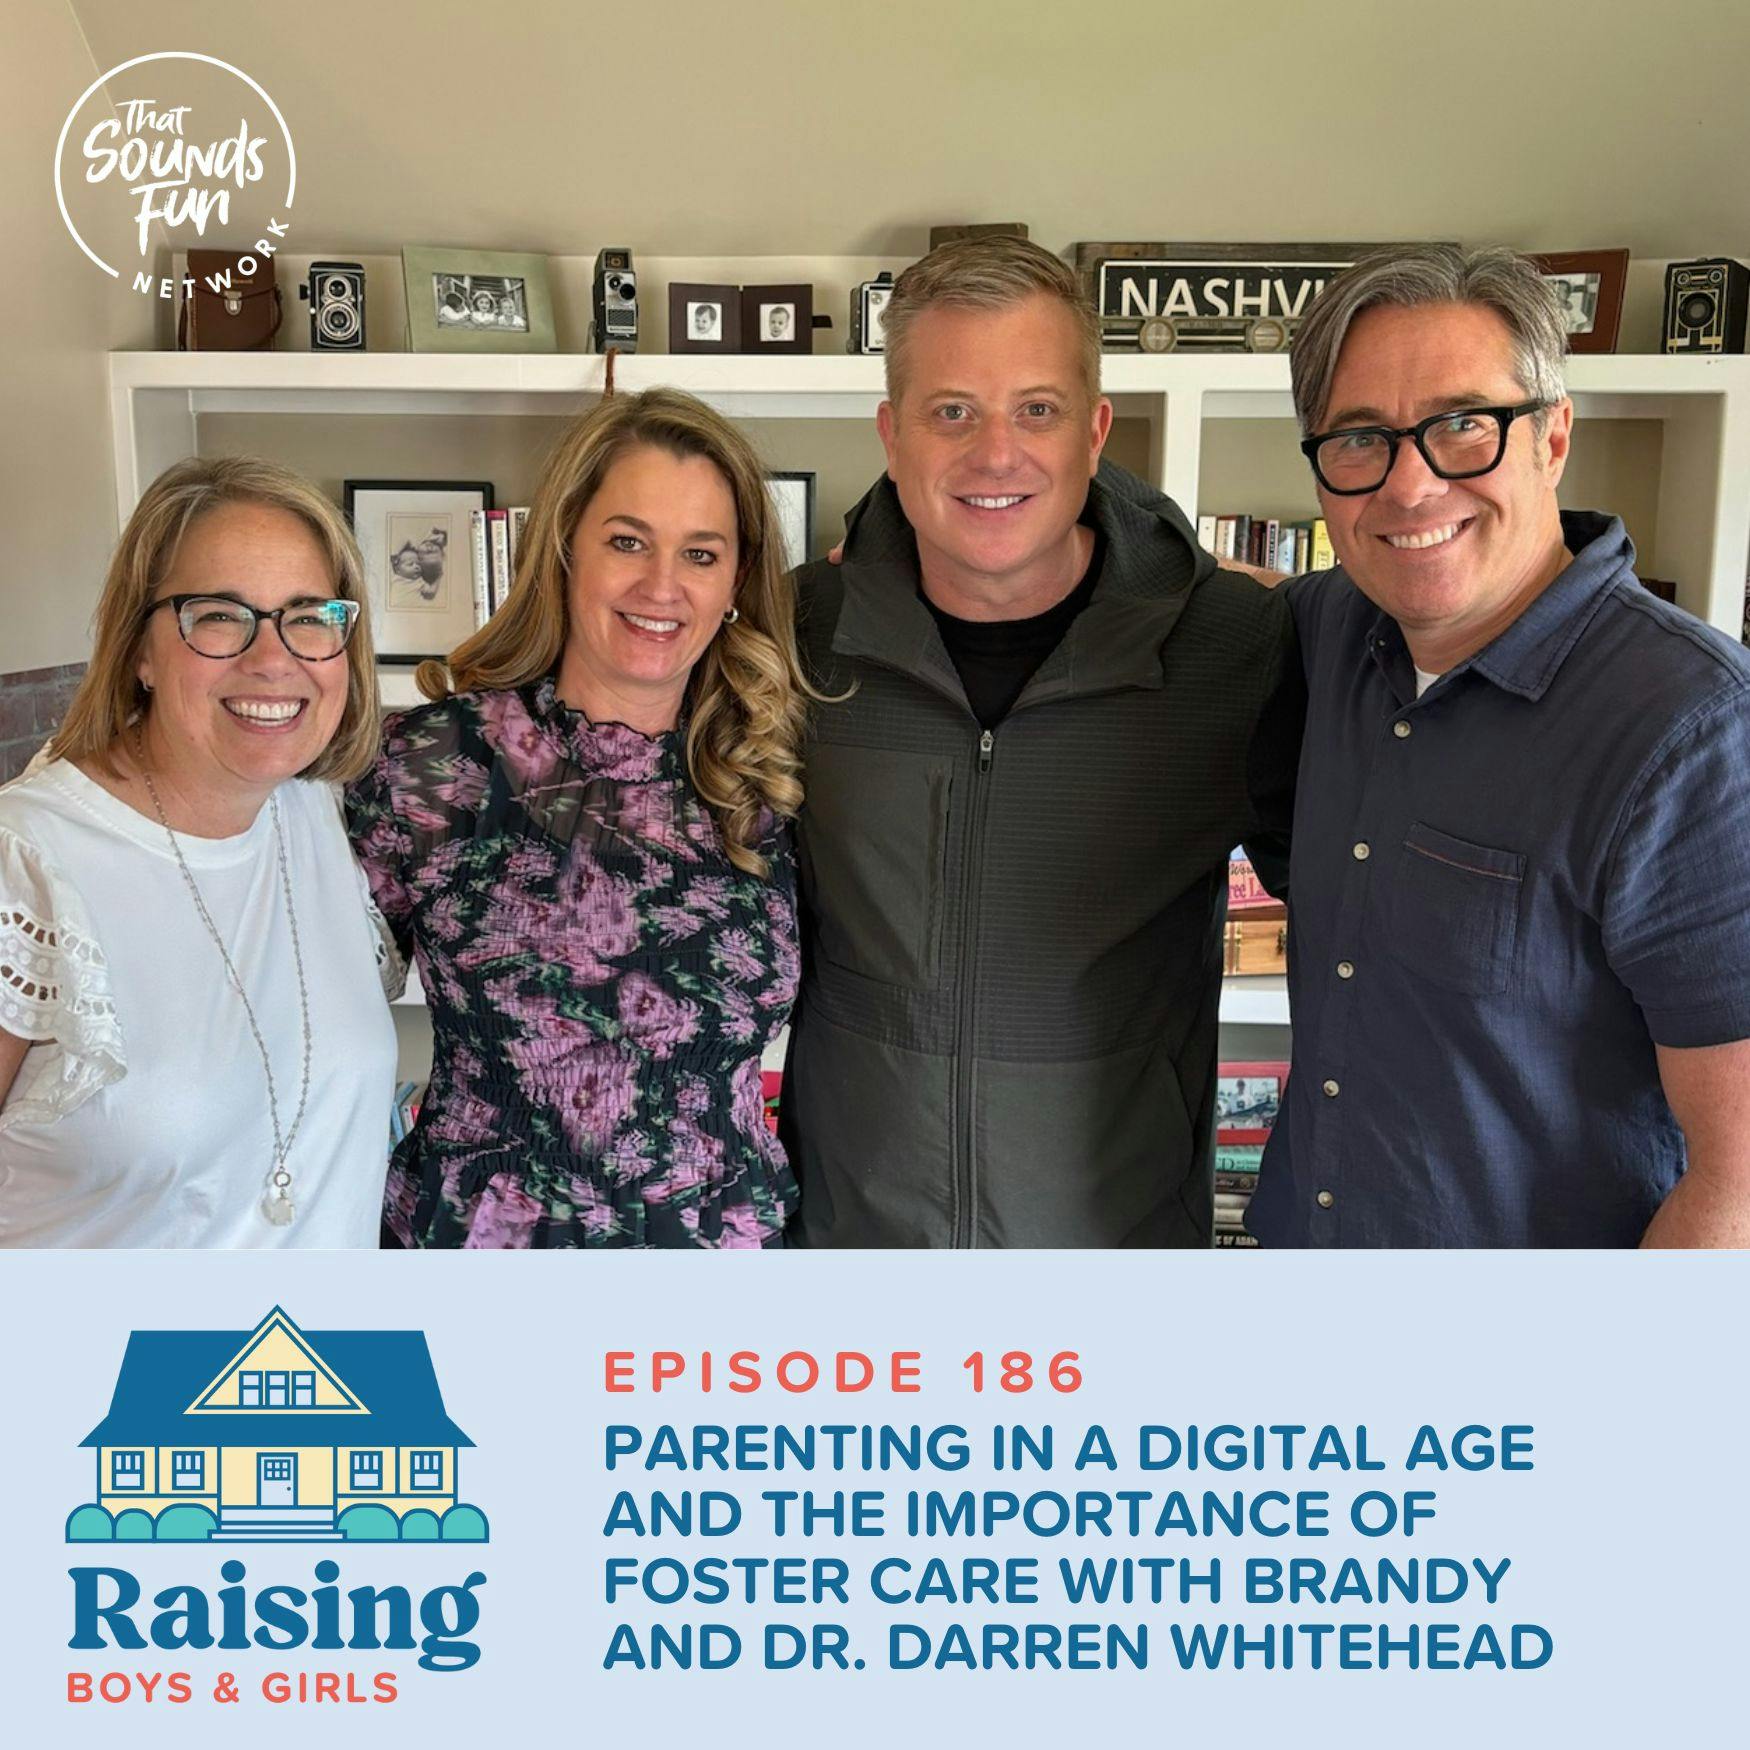 Episode 186: Parenting in a Digital Age and the Importance of Foster Care with Dr. Darren & Brandy Whitehead